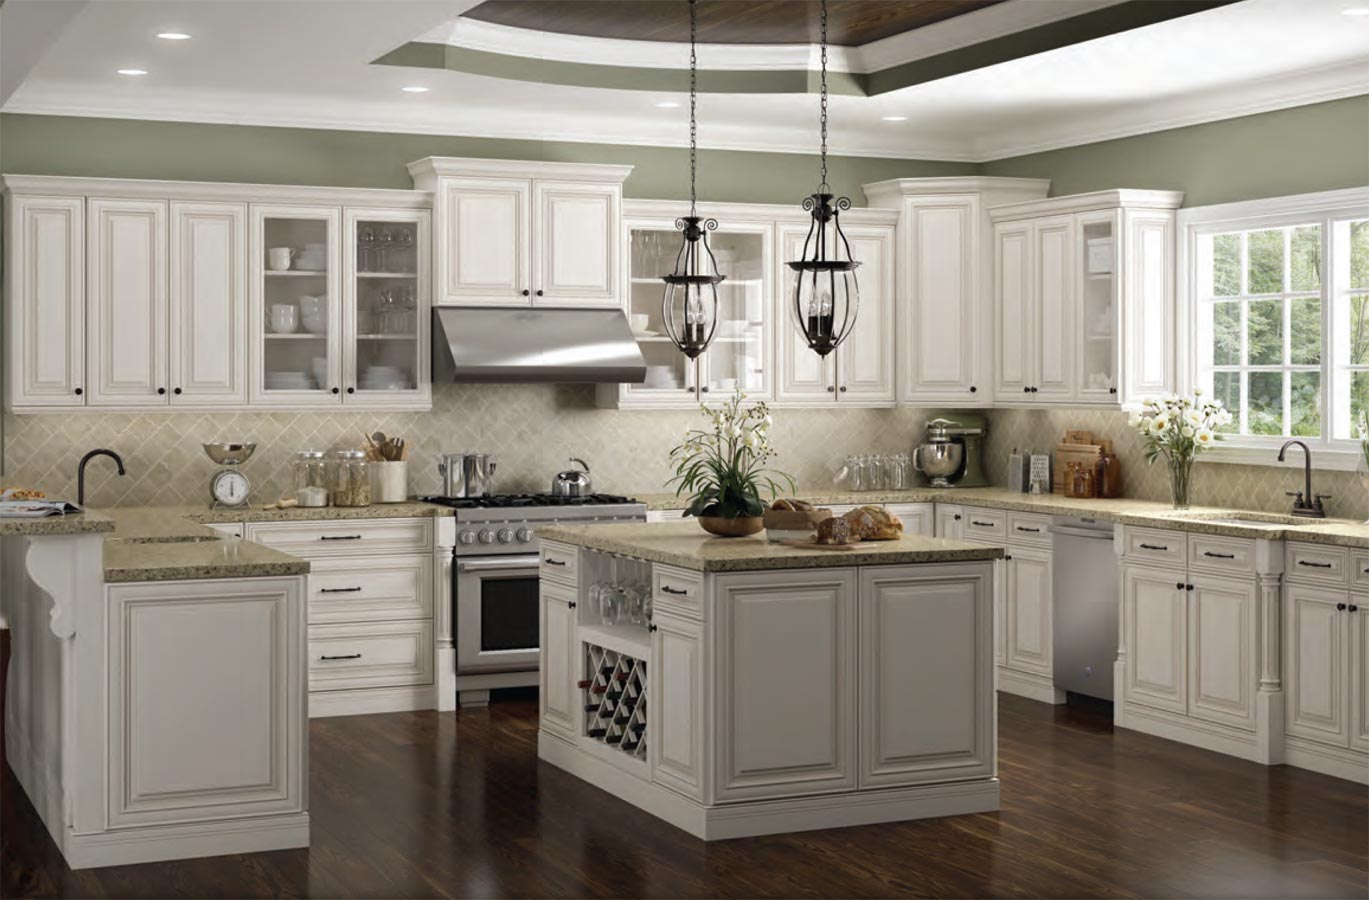 New Antique White Kitchen Cabinets for Simple Design